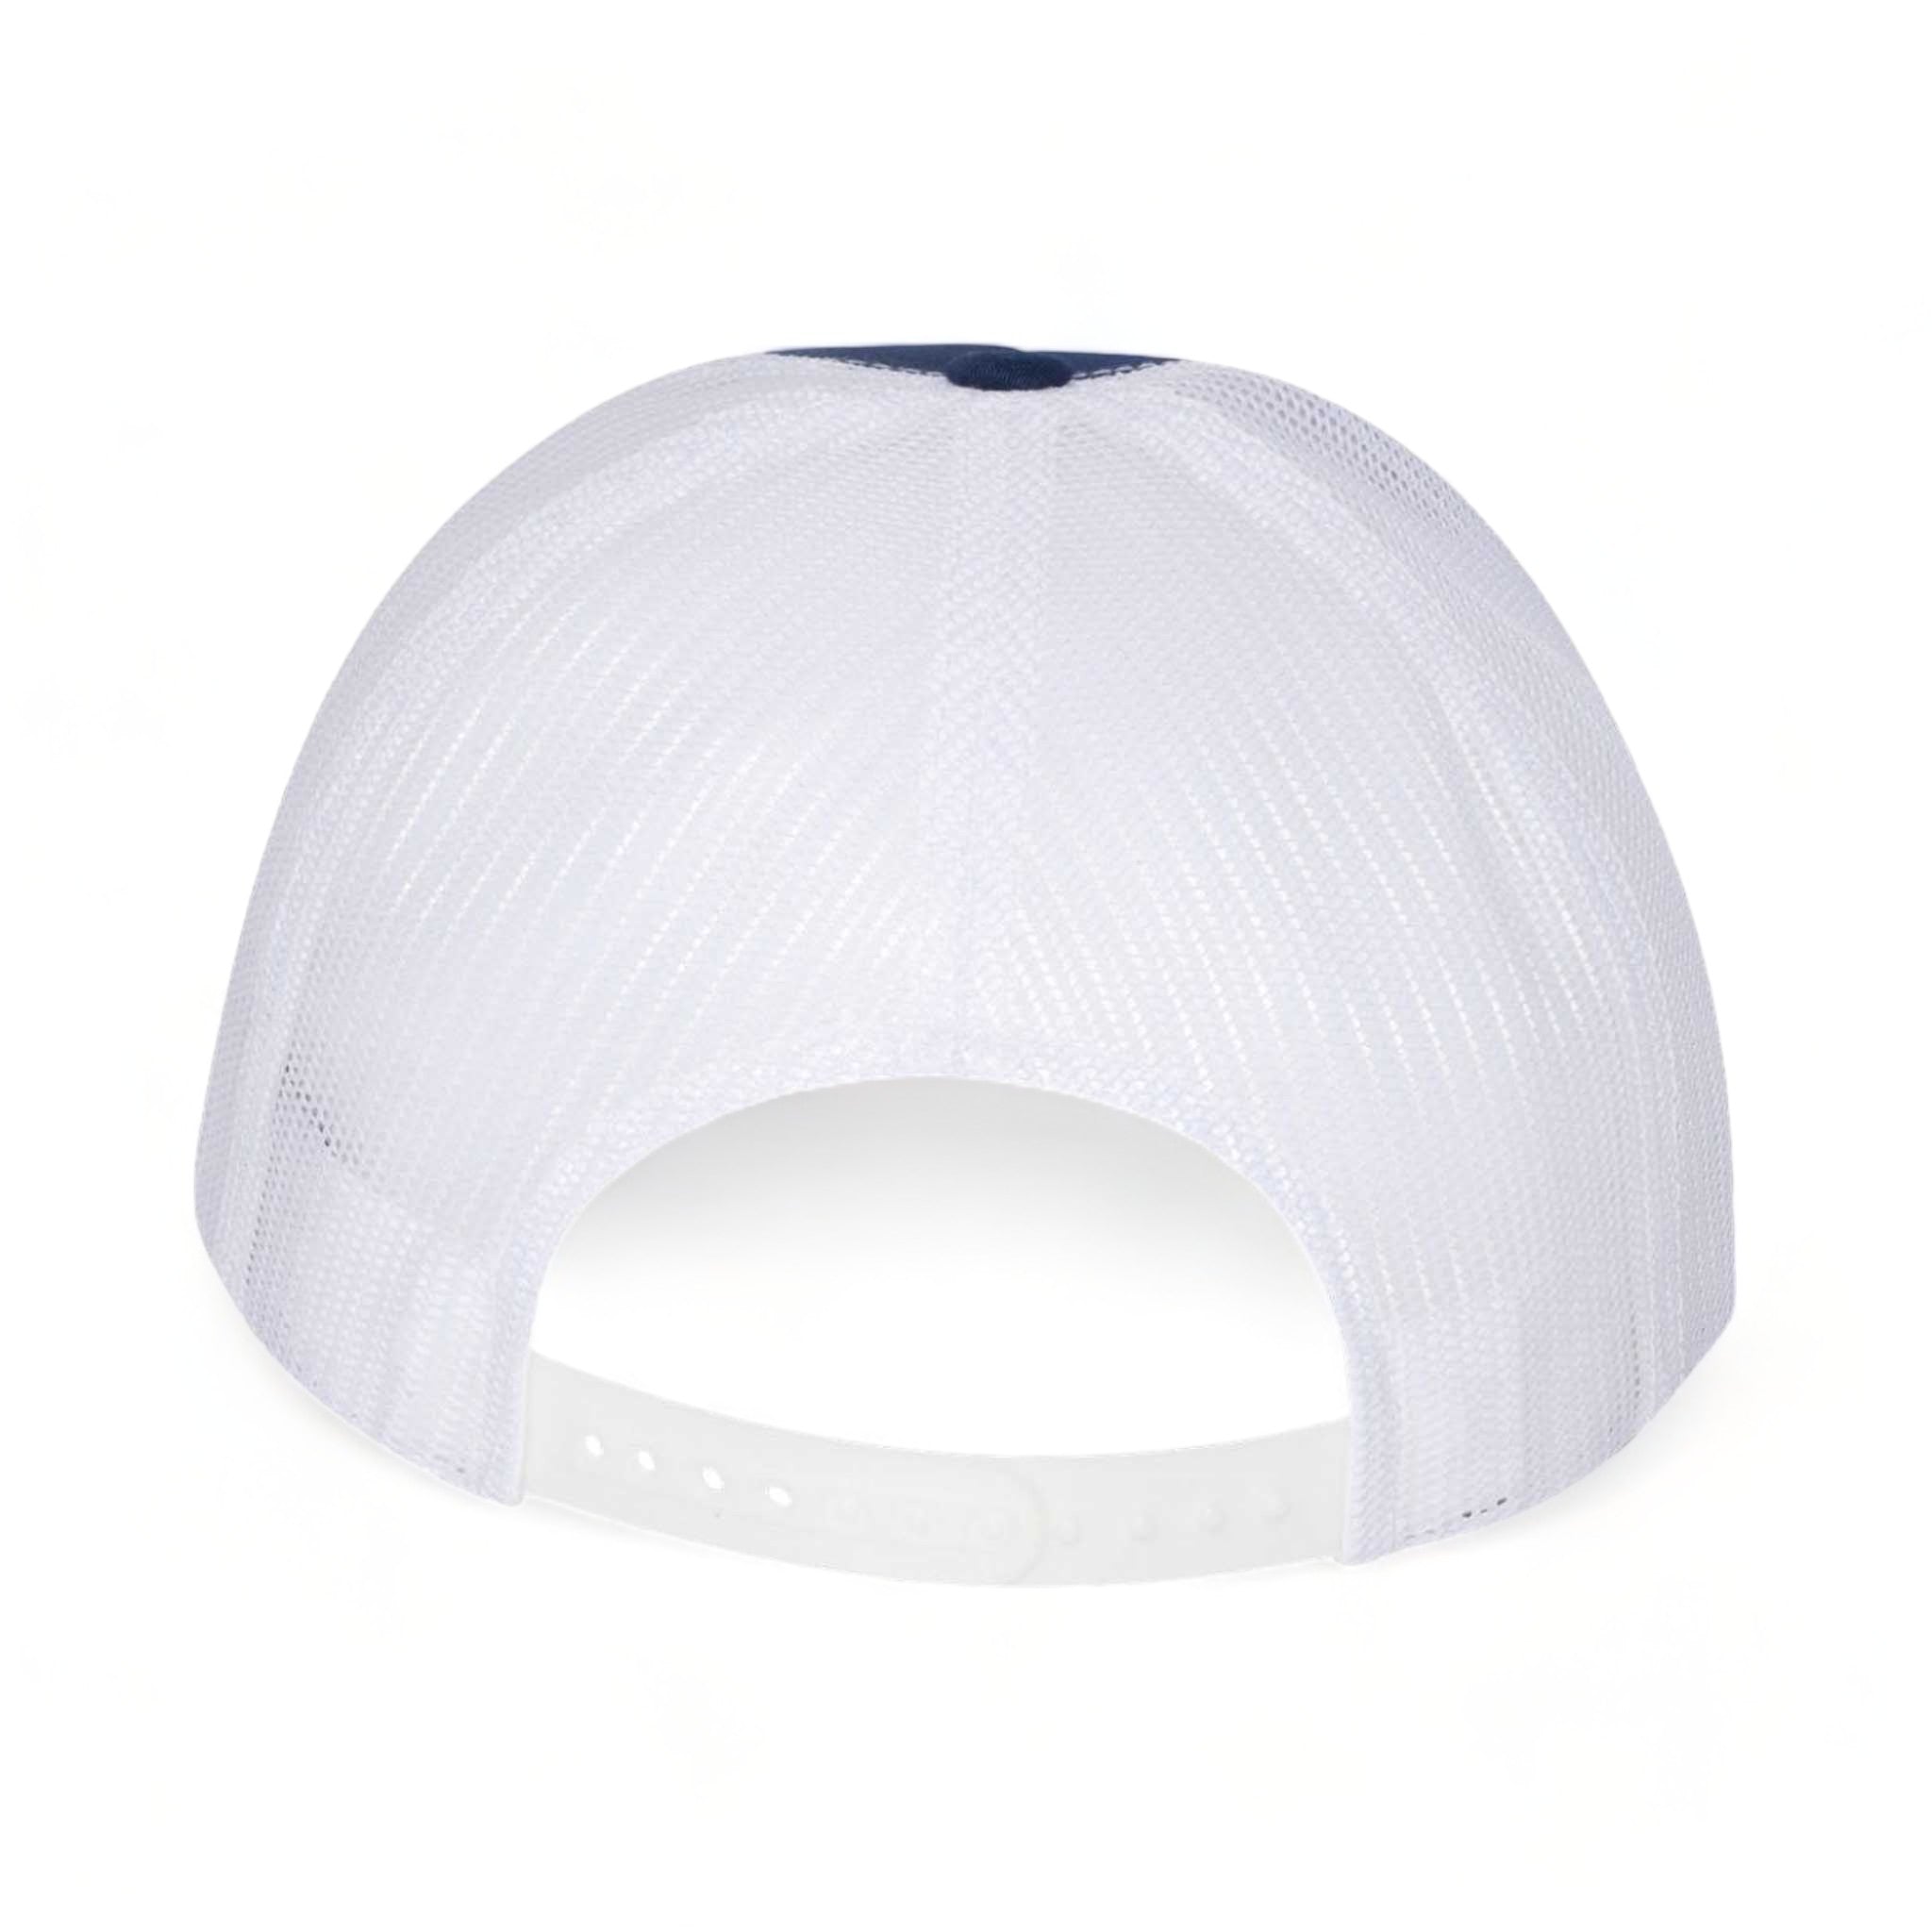 Back view of YP Classics 6006 custom hat in navy and white